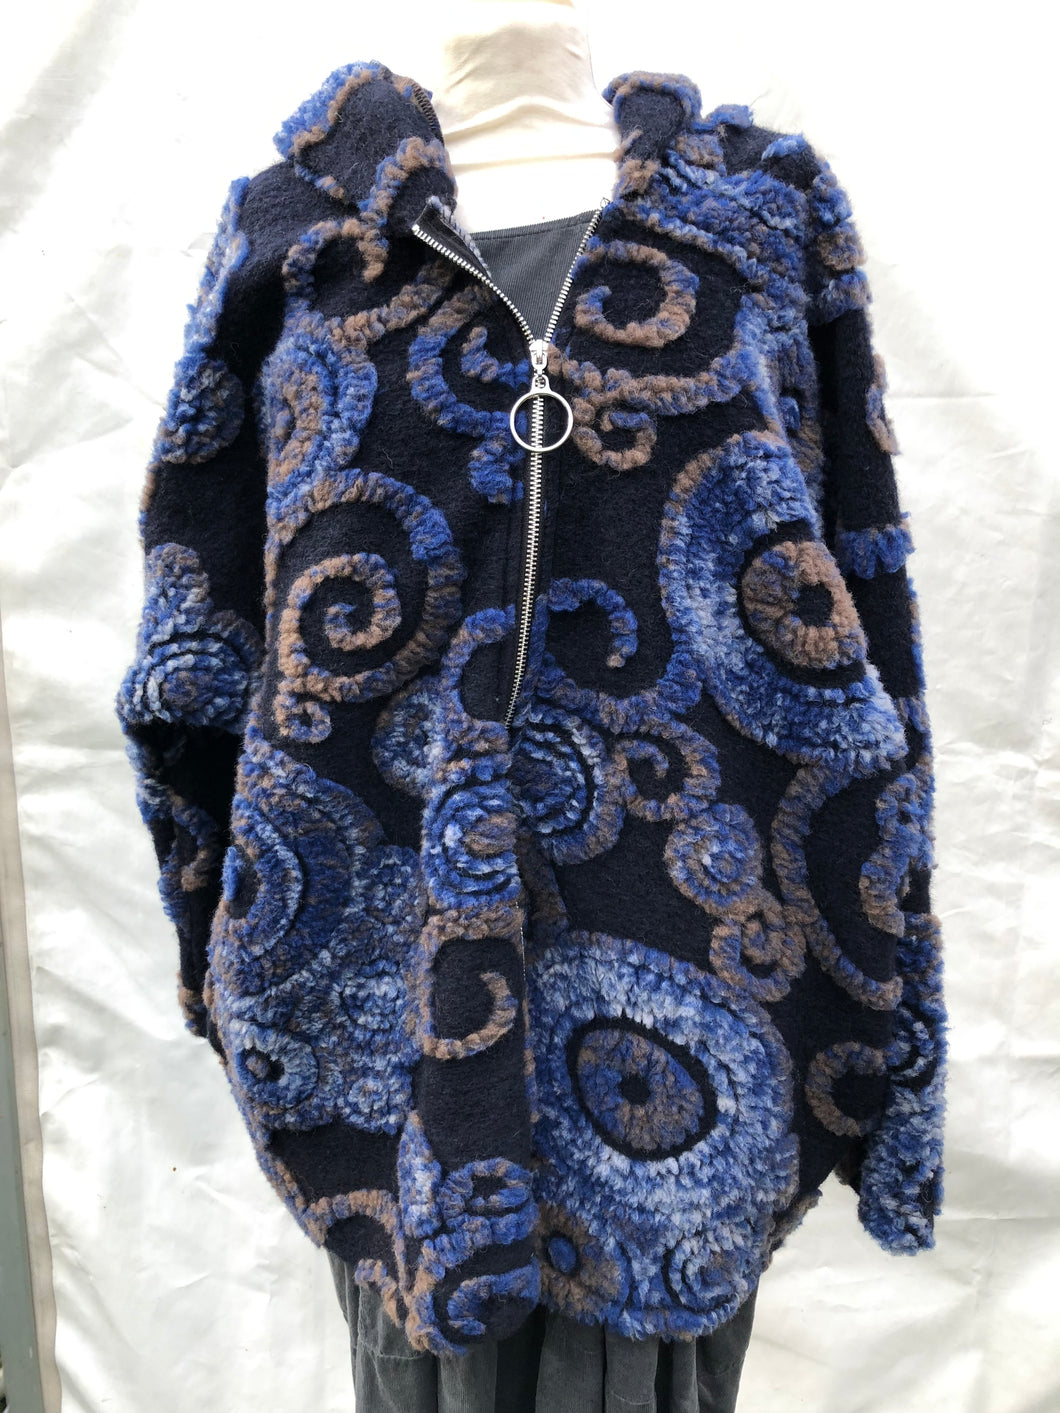 Black with royal blue, brown and white swirl design 100% wool coat